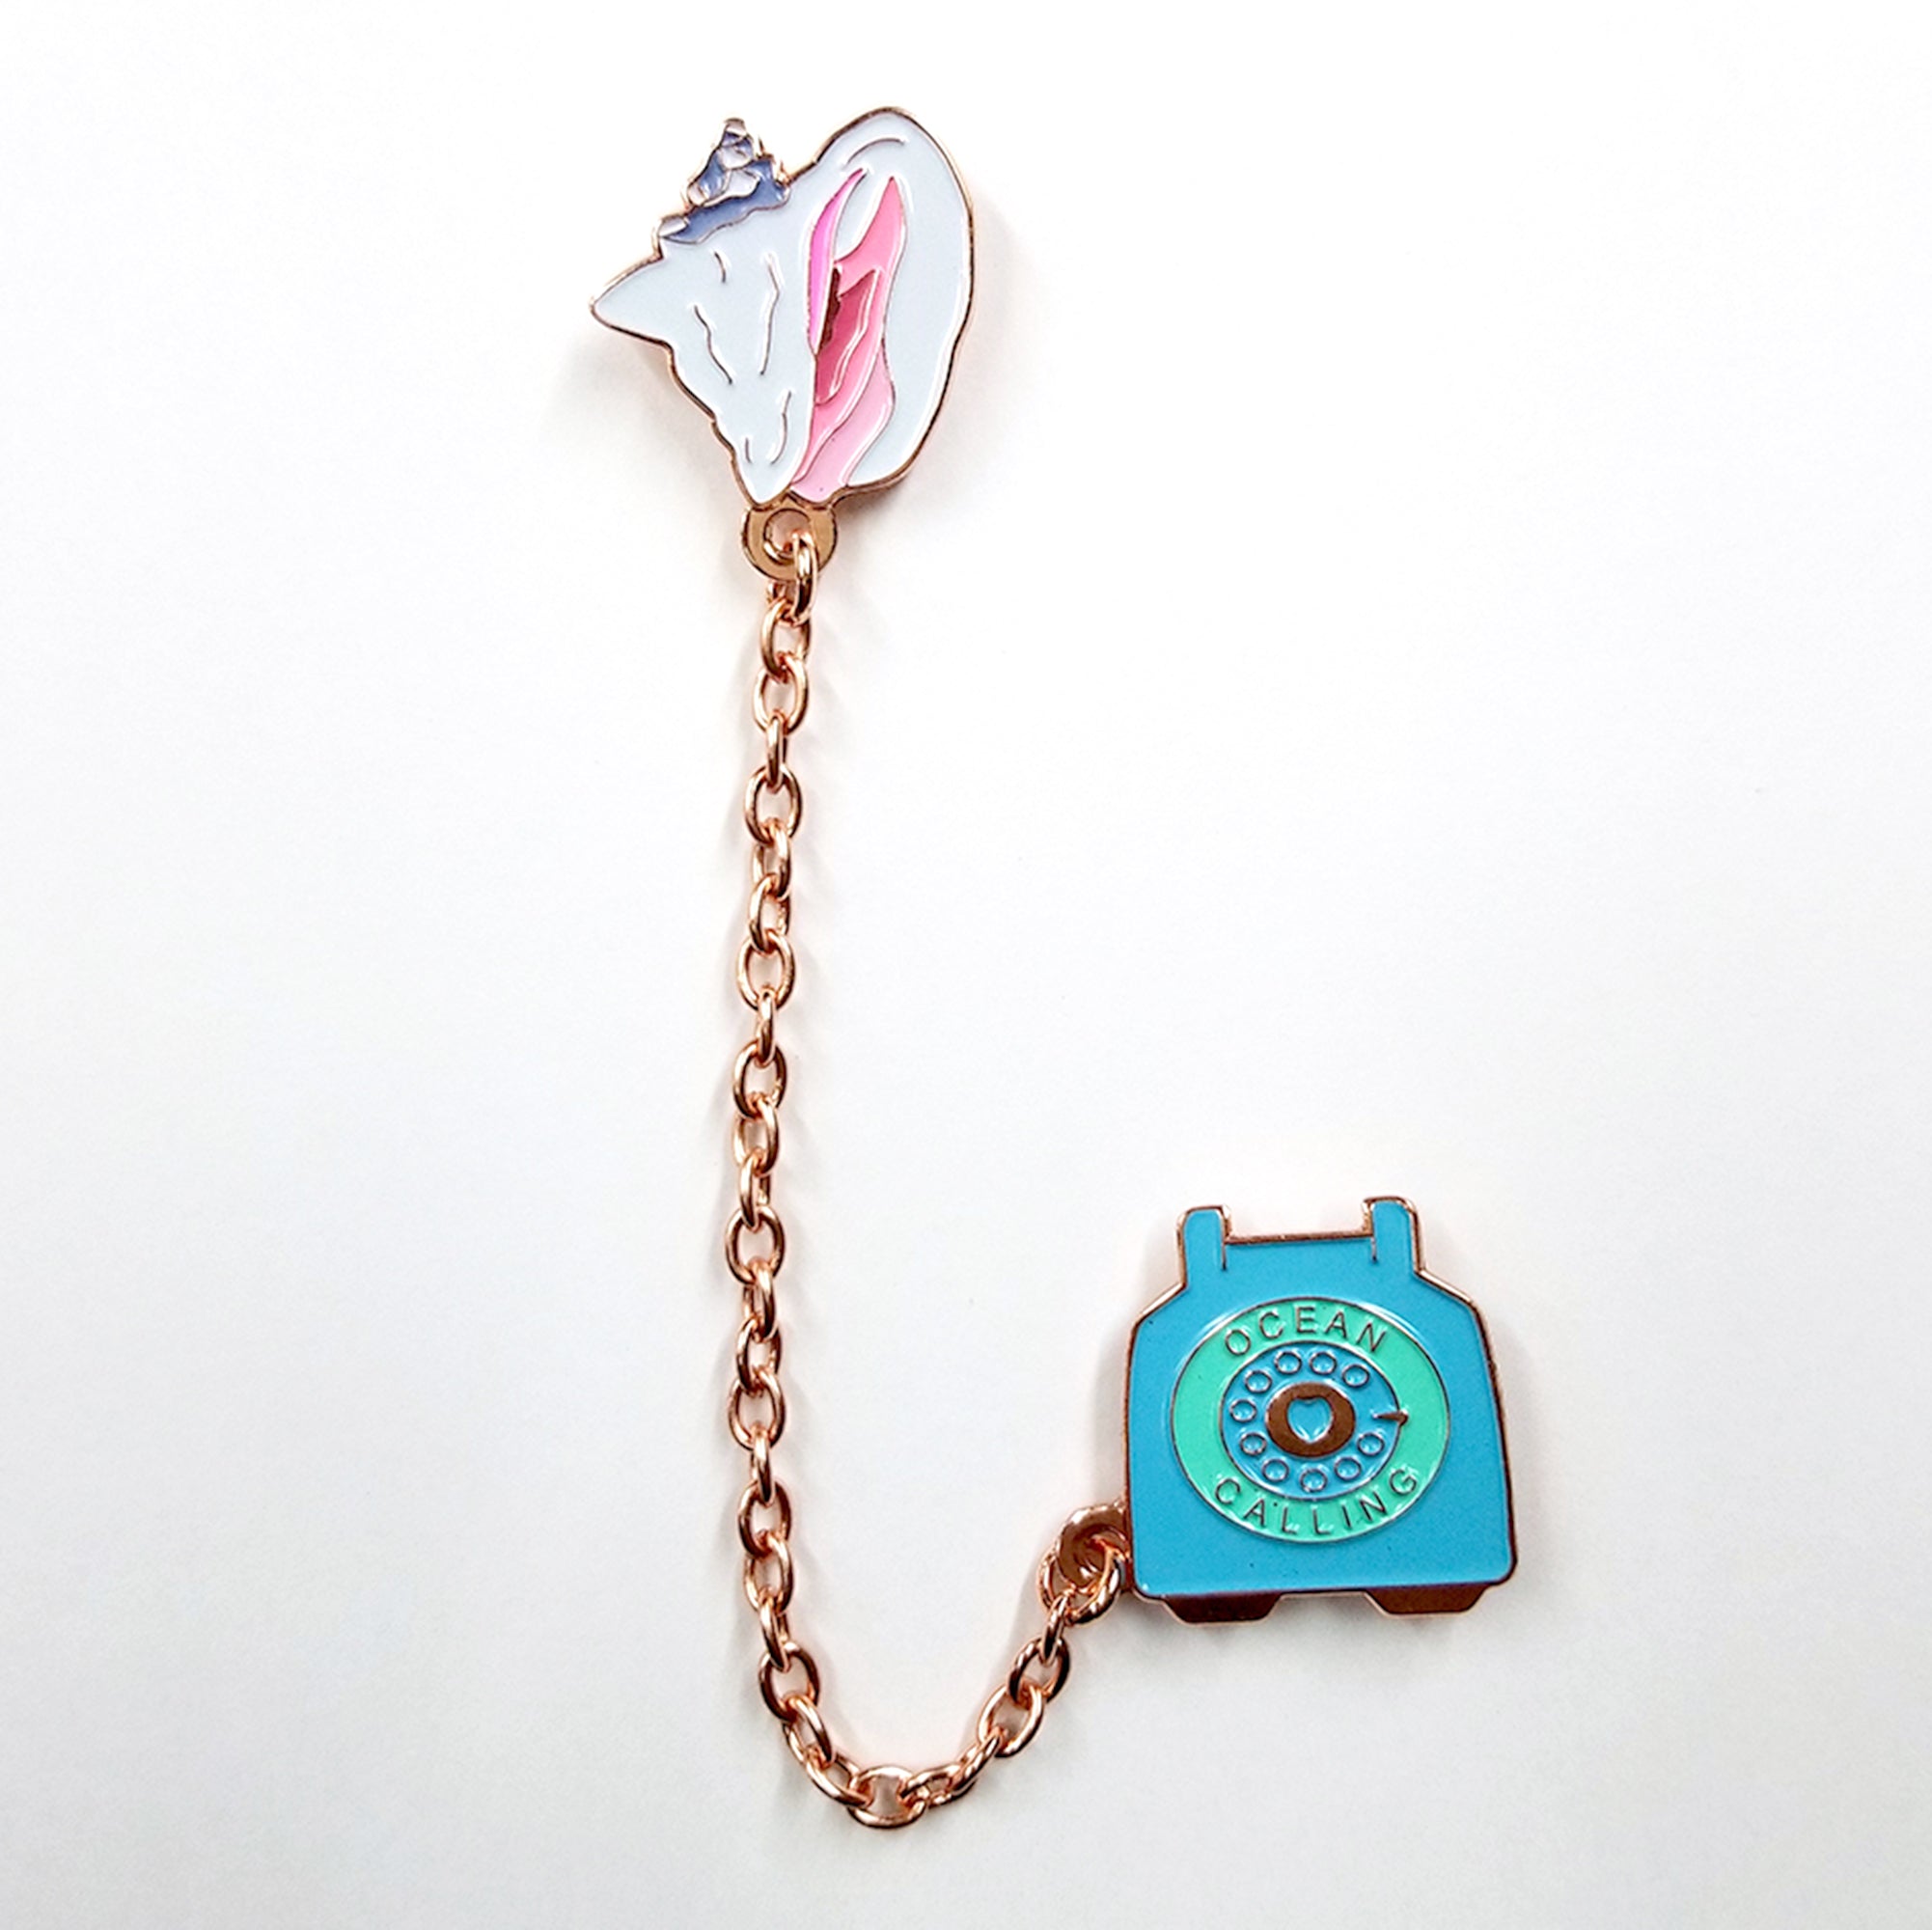 THE OCEANS CALLING PIN (SHELL PHONE)